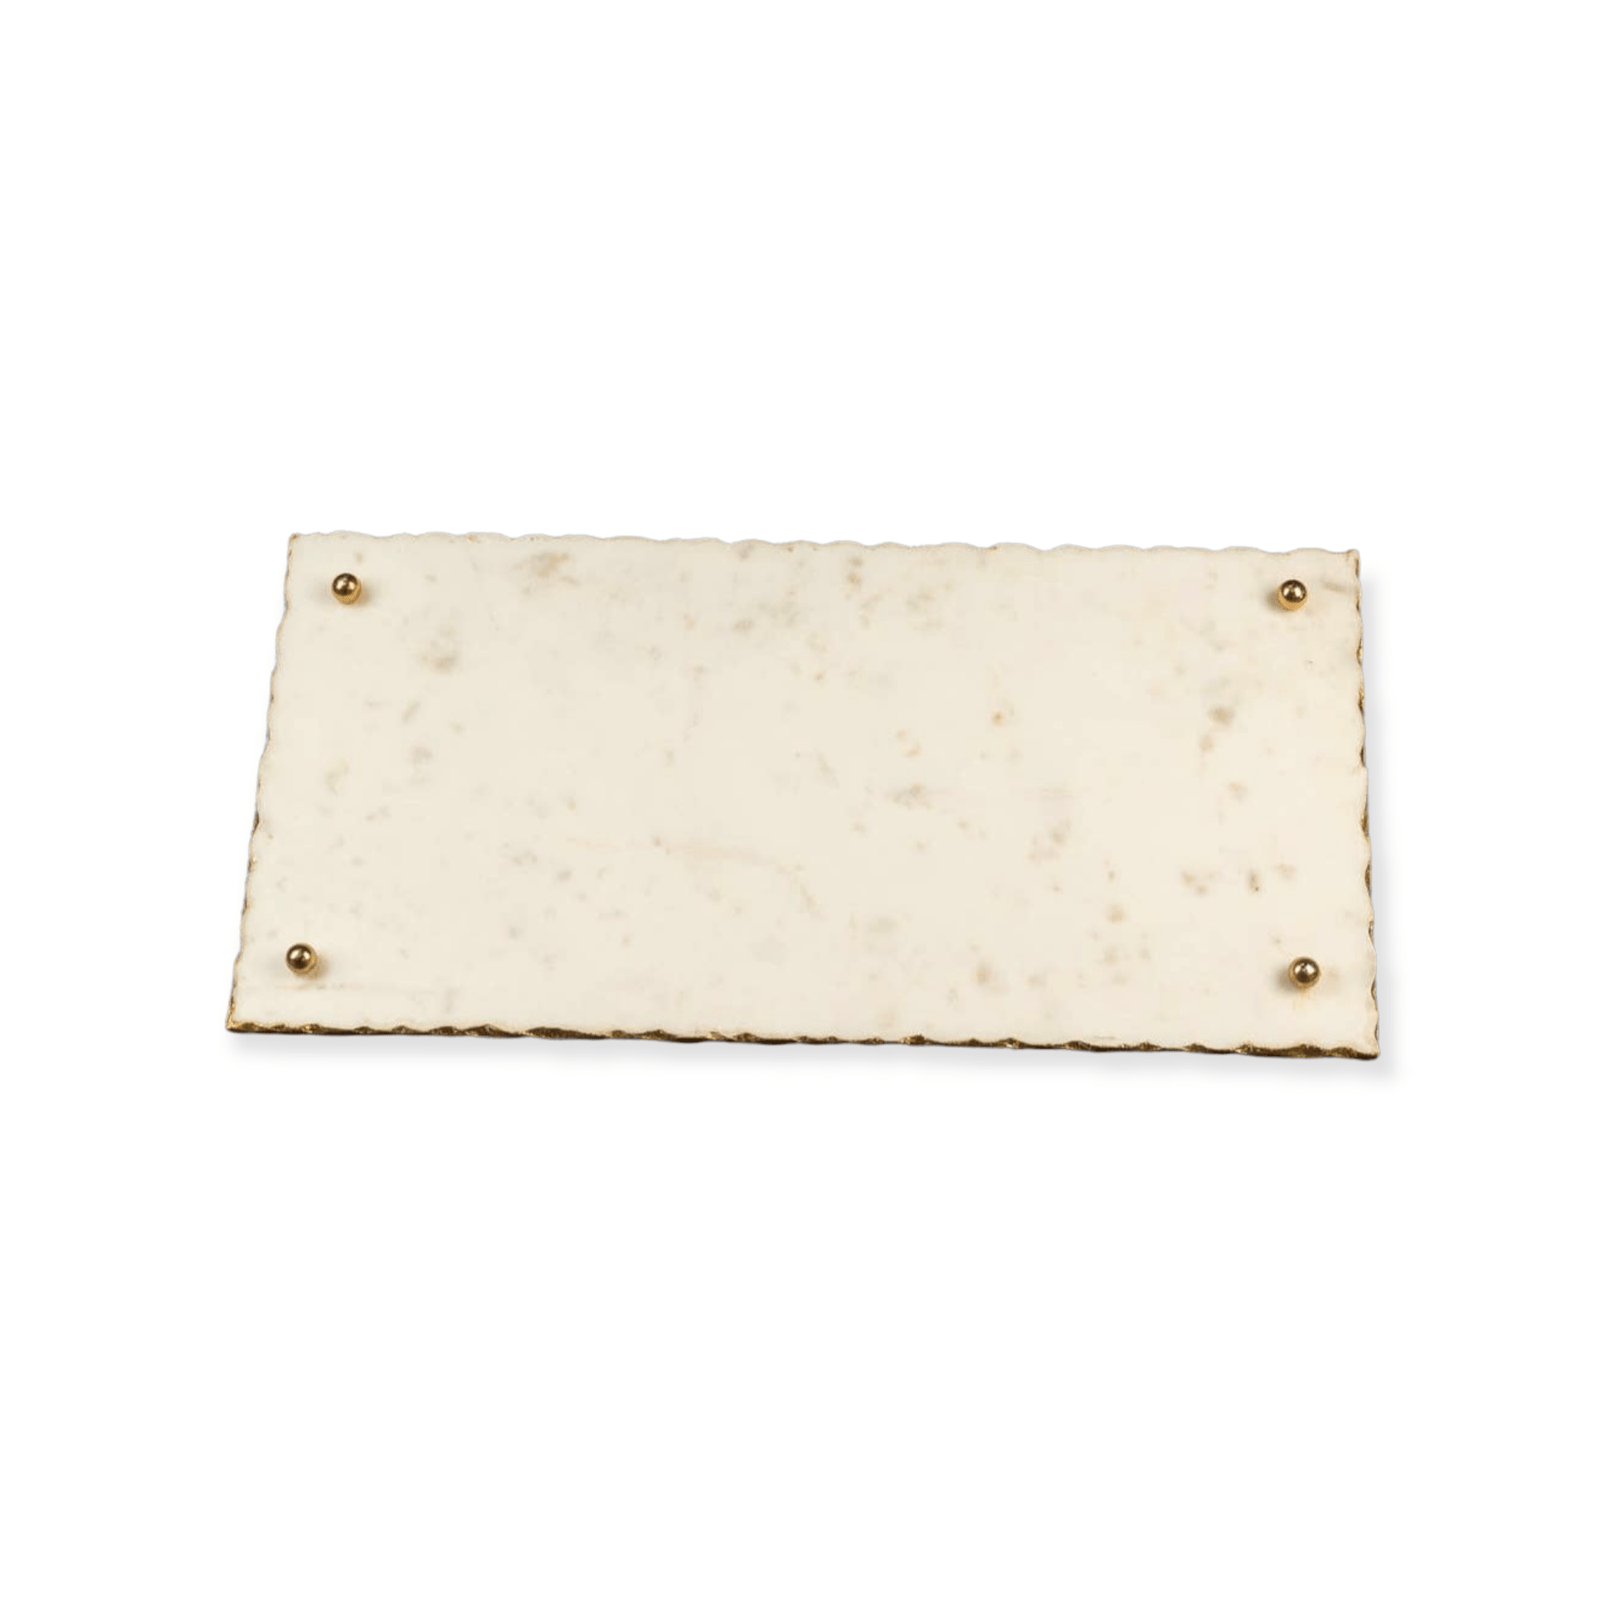 Marble Tray w/Gold Dented Border - Exquisite Designs Home Décor 